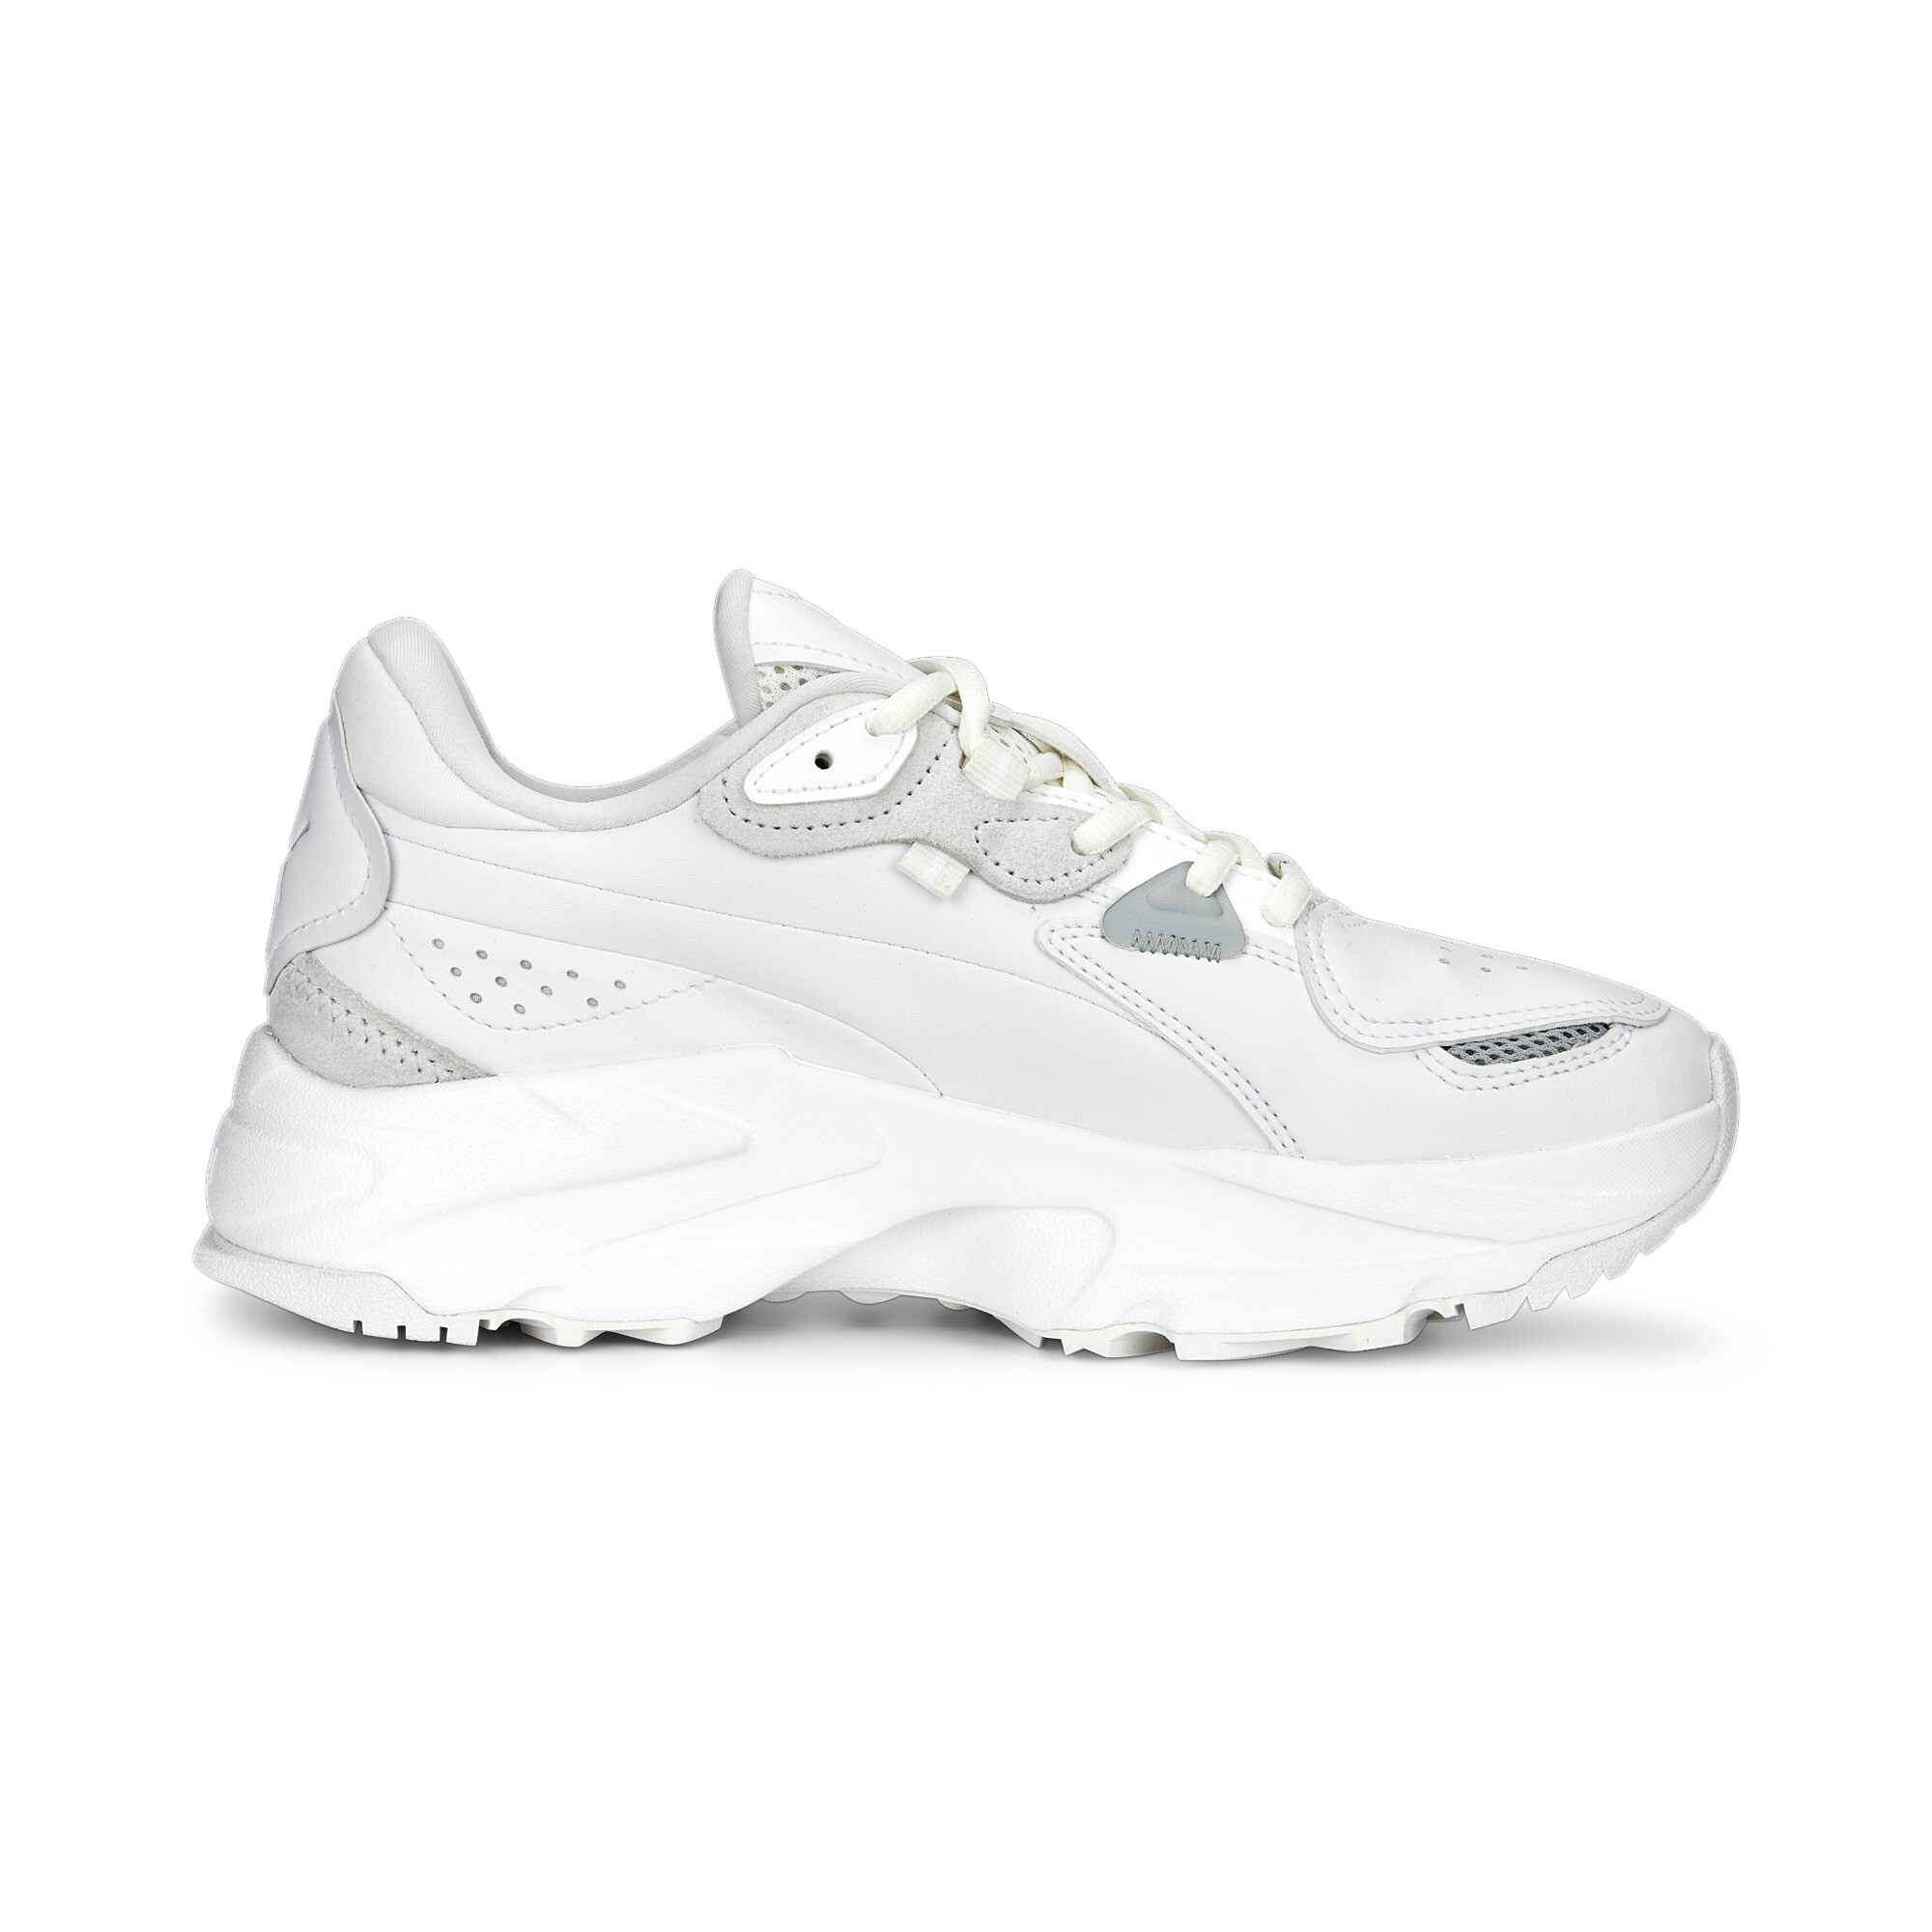 Women's Puma Orkid's Trainers, White, Size 35.5, Shoes